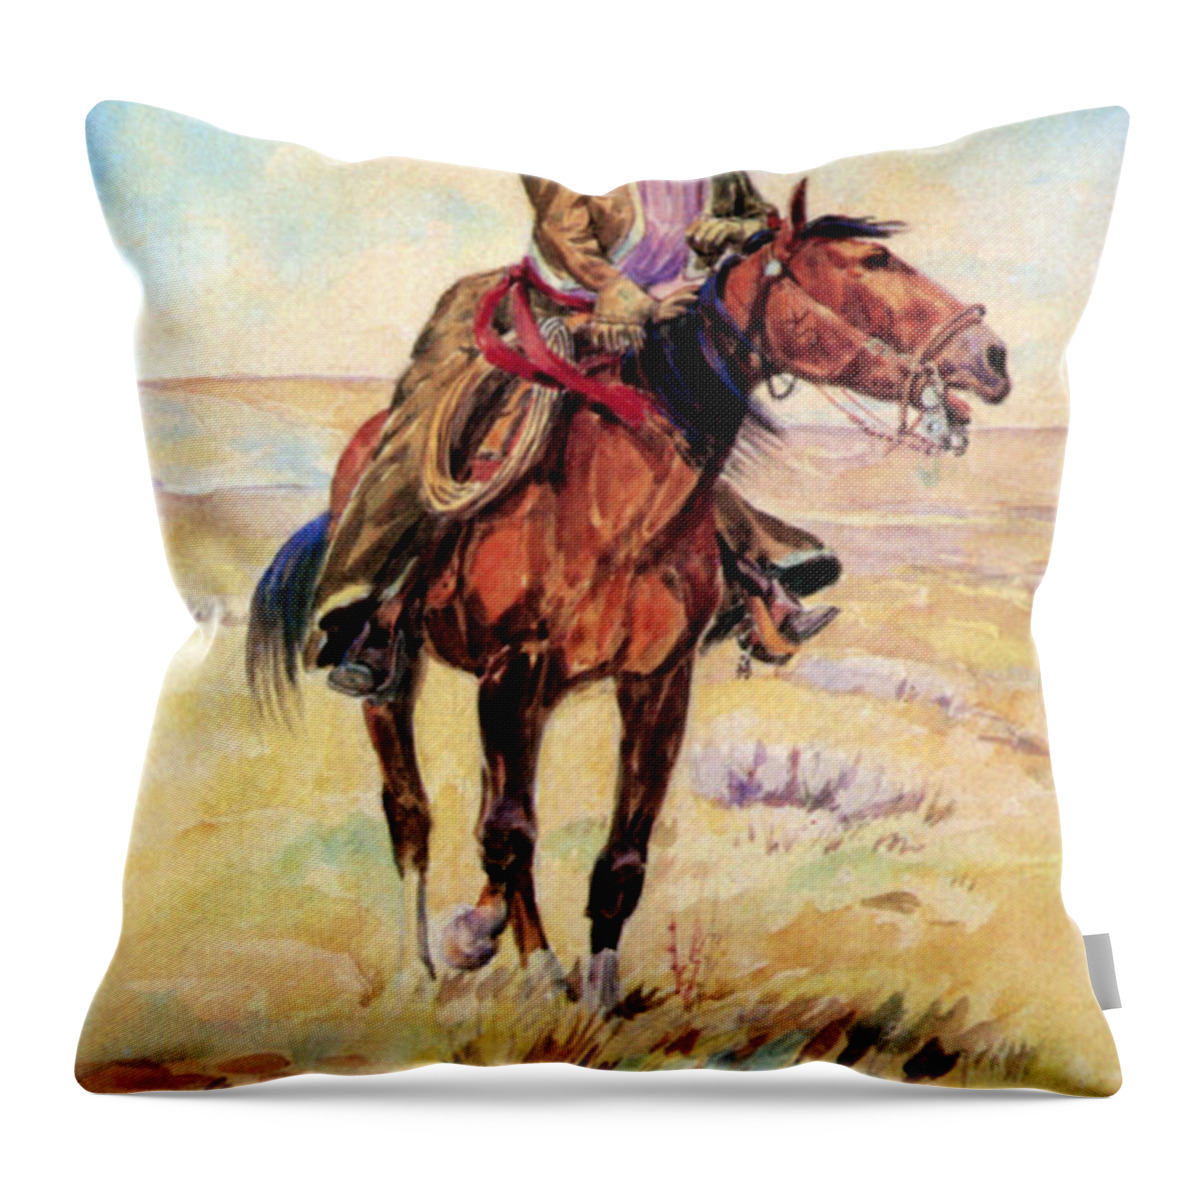 Occupation Throw Pillow featuring the painting Wyoming Cowgirl, 1907 by Science Source